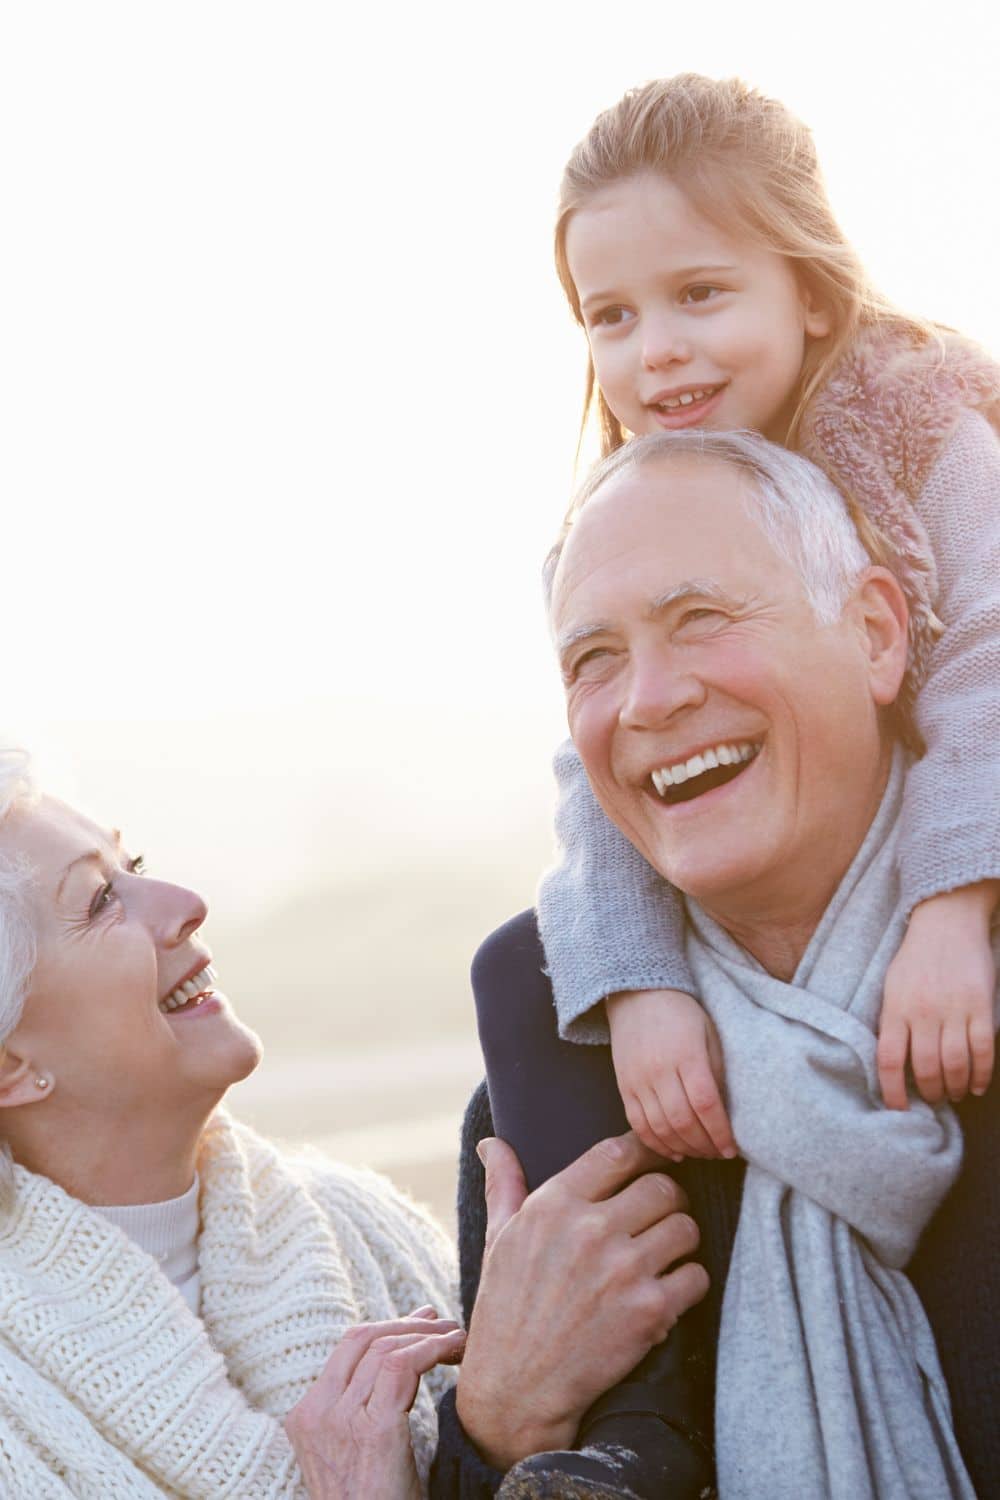 How To Help Grandparents Maintain Their Independence As They Age